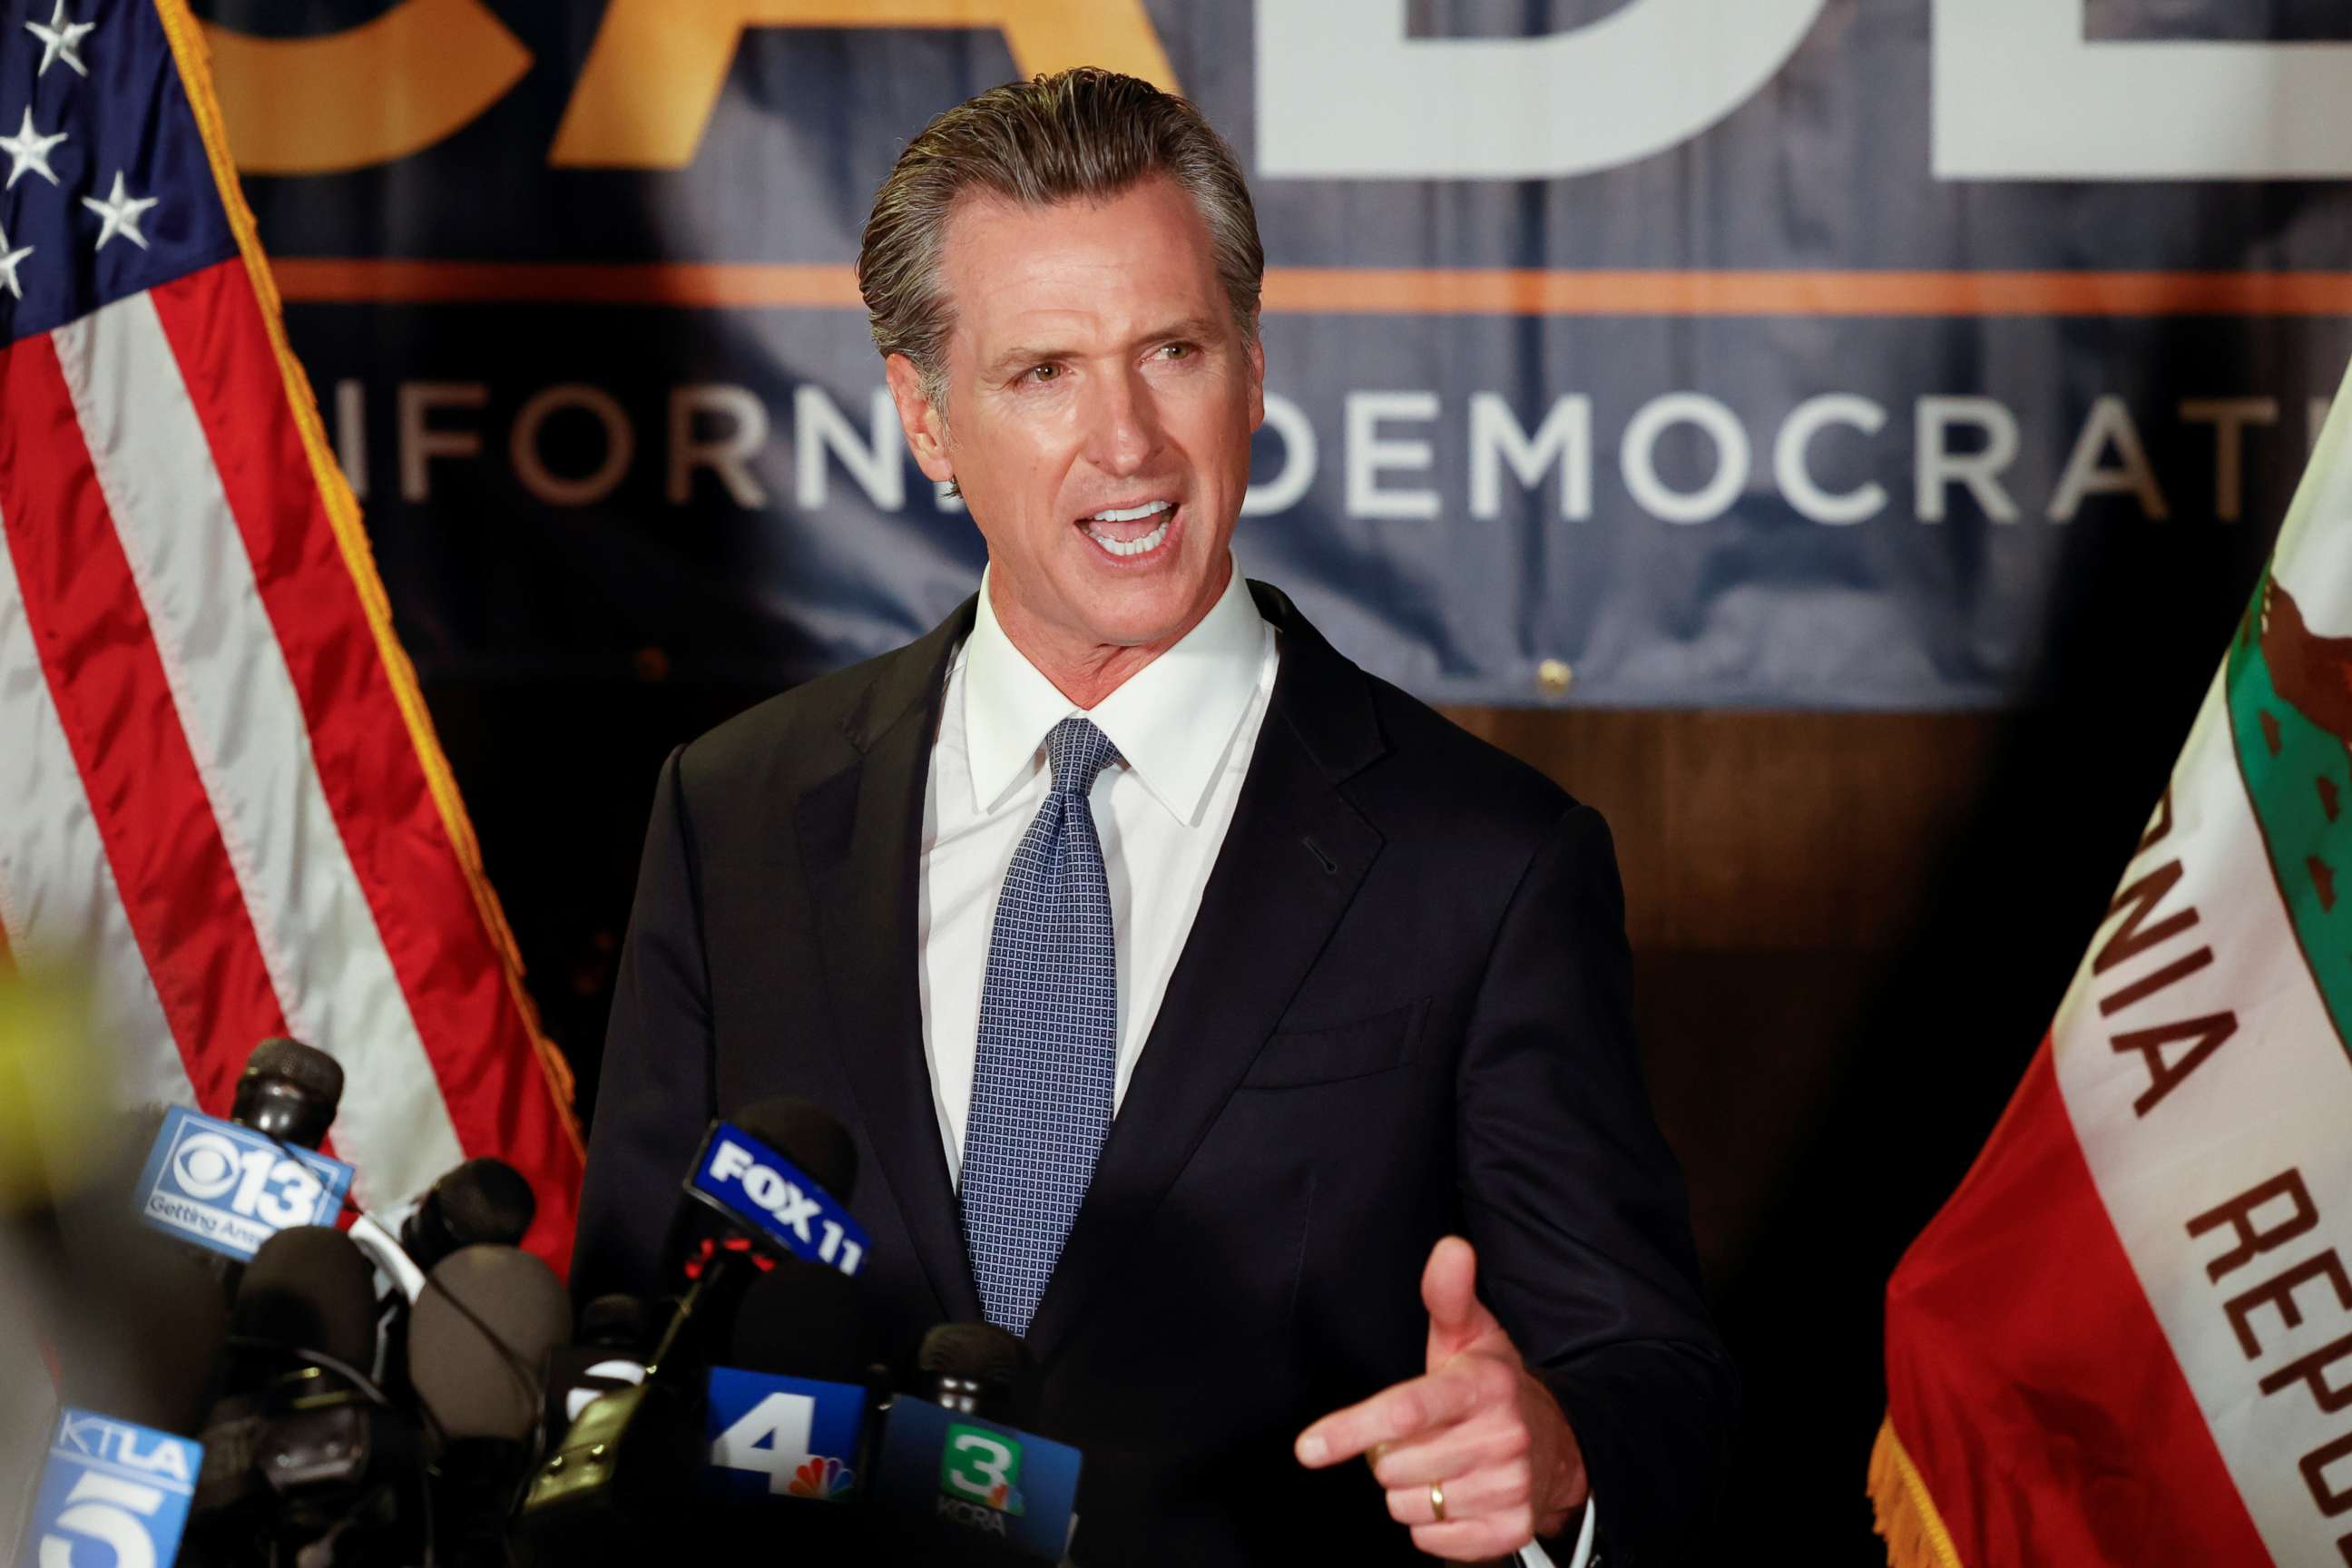 PHOTO: California Gov. Gavin Newsom makes an appearance after the polls close on the recall election, at the California Democratic Party headquarters in Sacramento, Calif., Sept. 14, 2021.